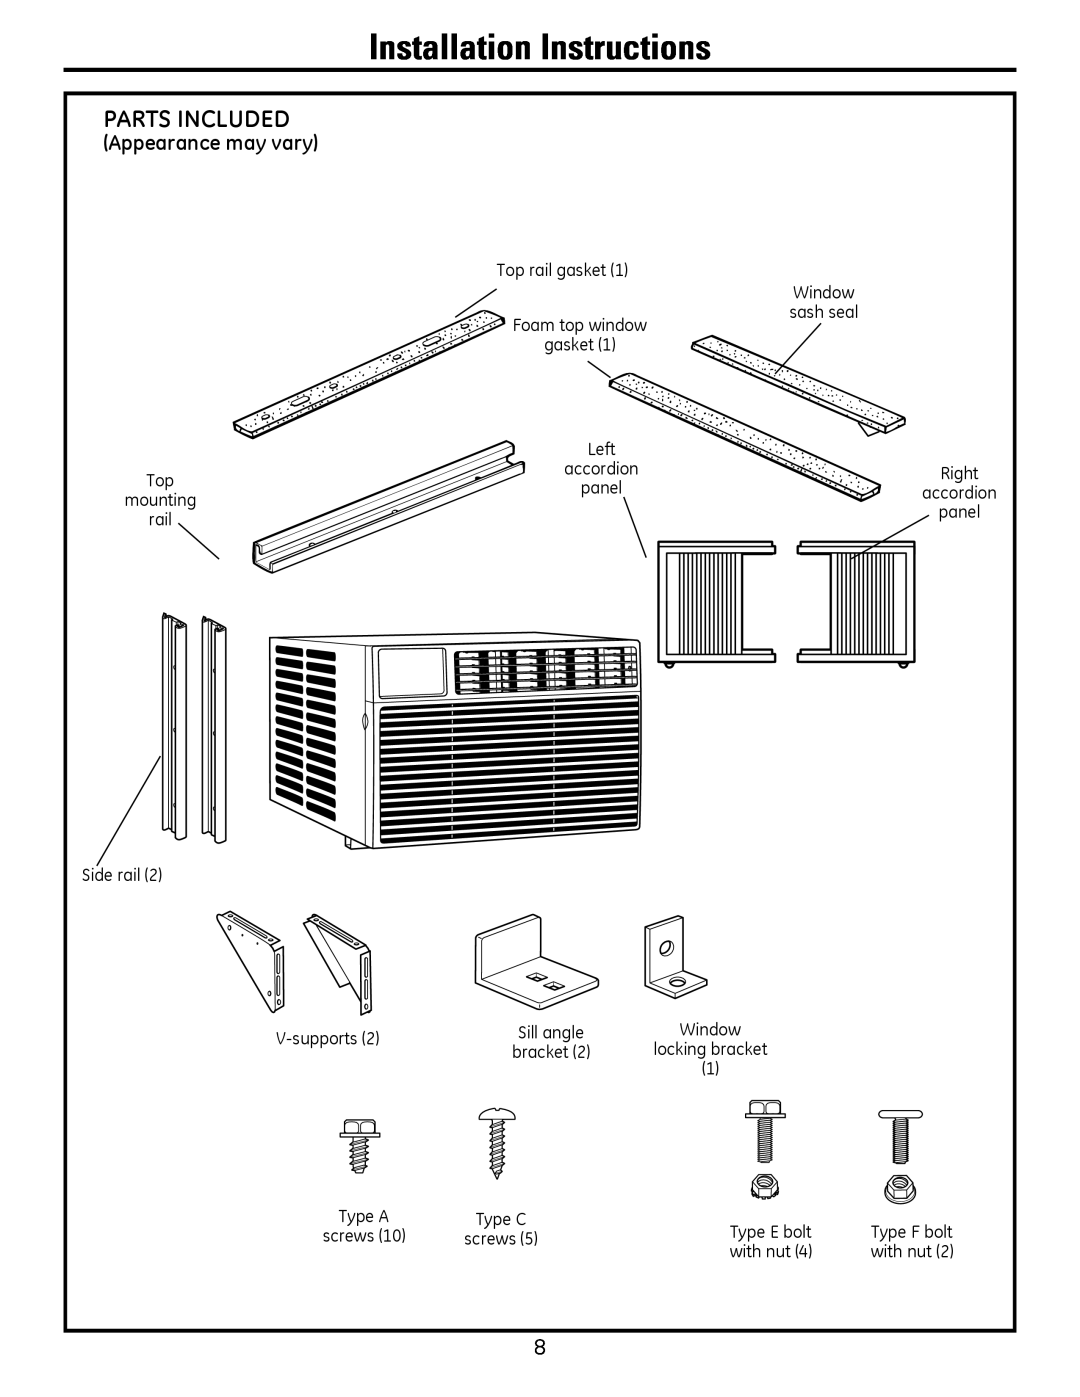 GE AEQ2, AEM2 installation instructions Installation Instructions, Parts Included, Appearance may vary 